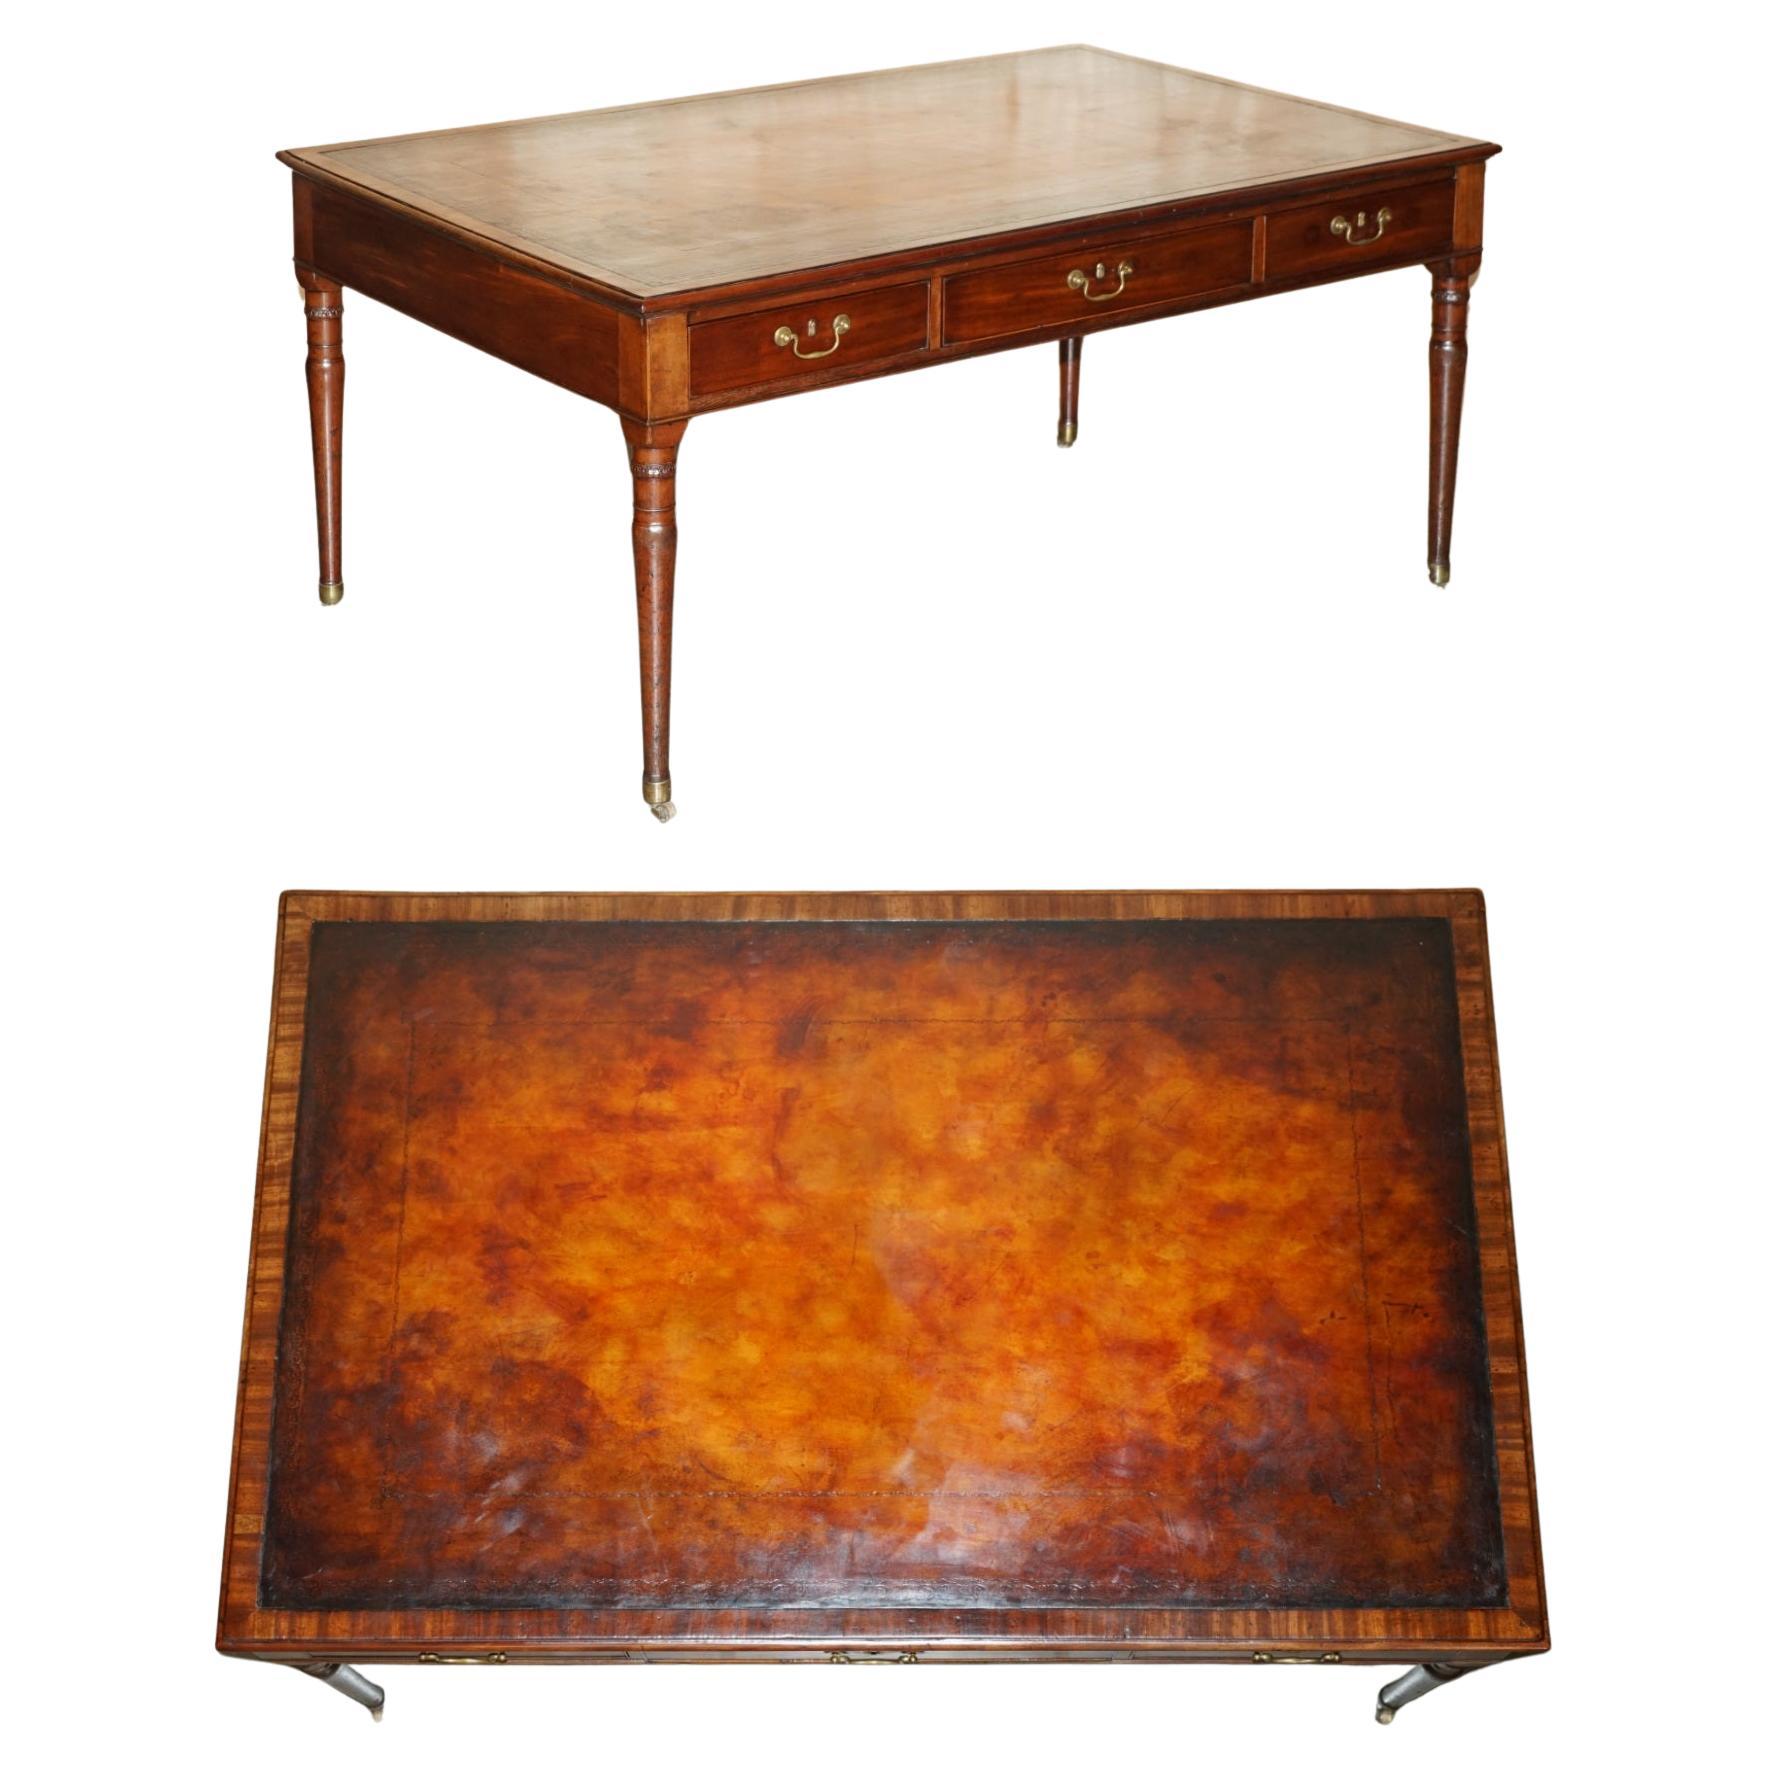 EXQUISITE ANTiQUE GEORGIAN IRISH 1780 RESTORED BROWN LEATHER WRITING TABLE DESK For Sale